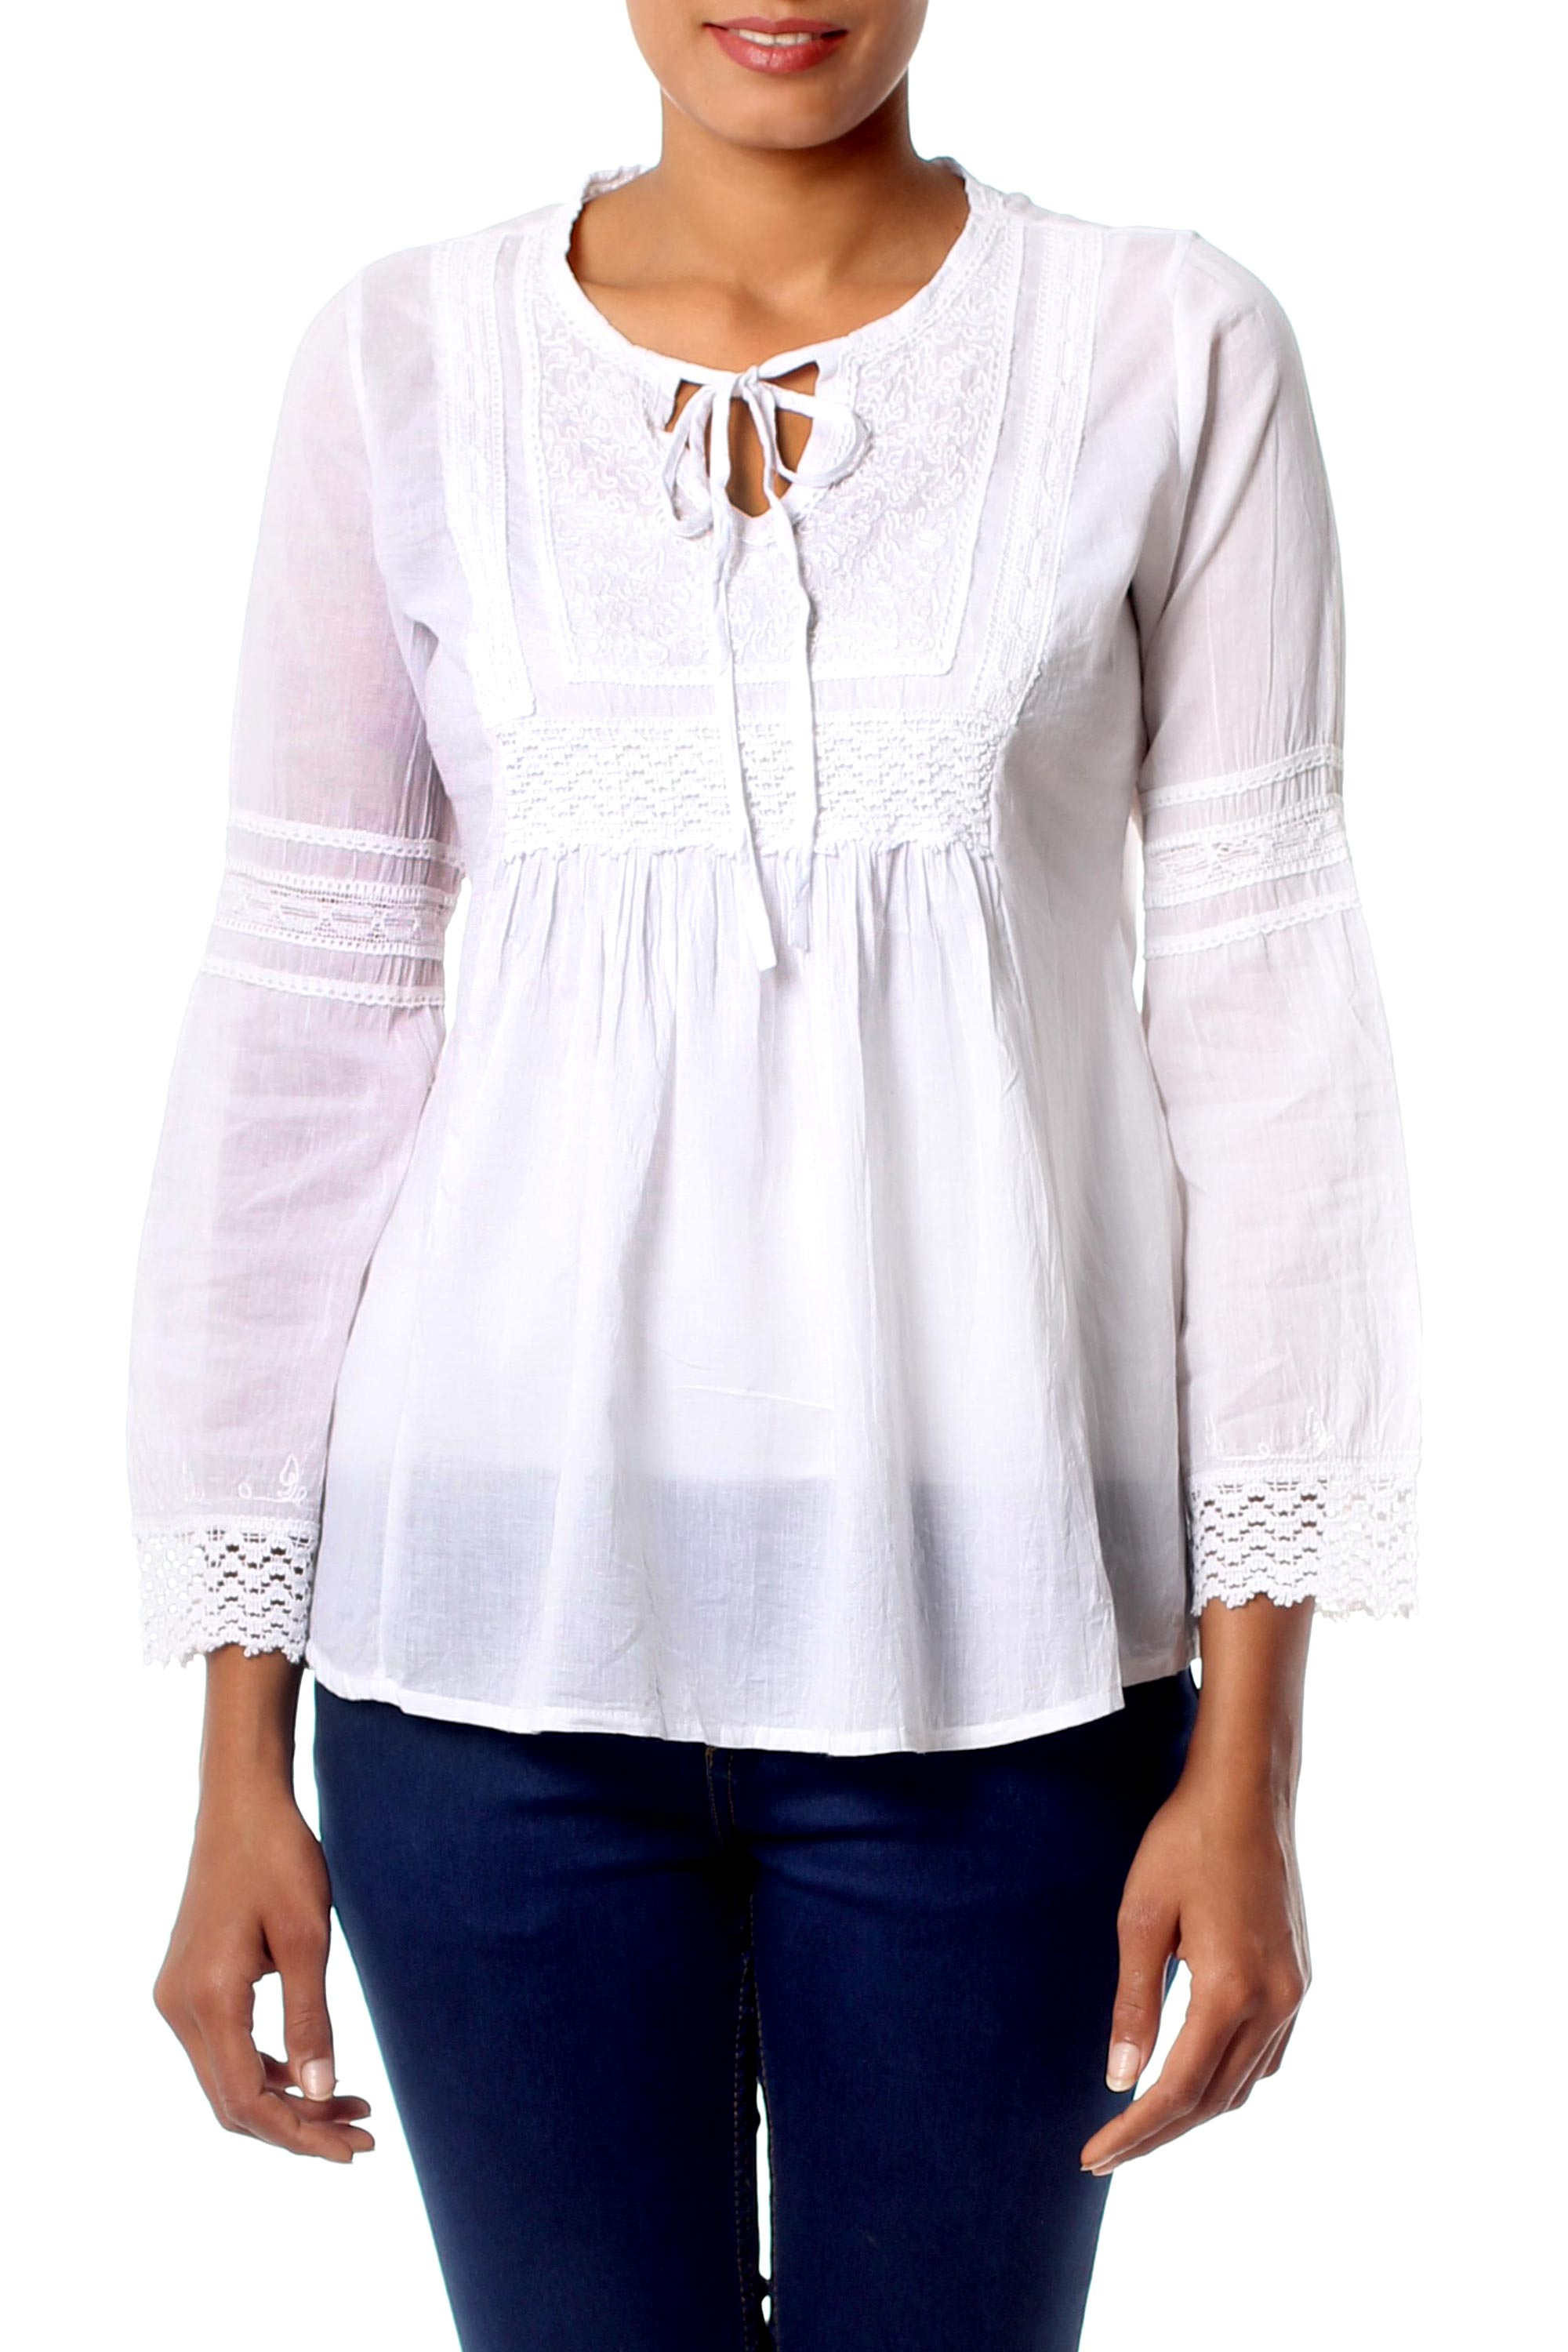 White Cotton Blouse Top Long Sleeve - Floral Clouds | NOVICA